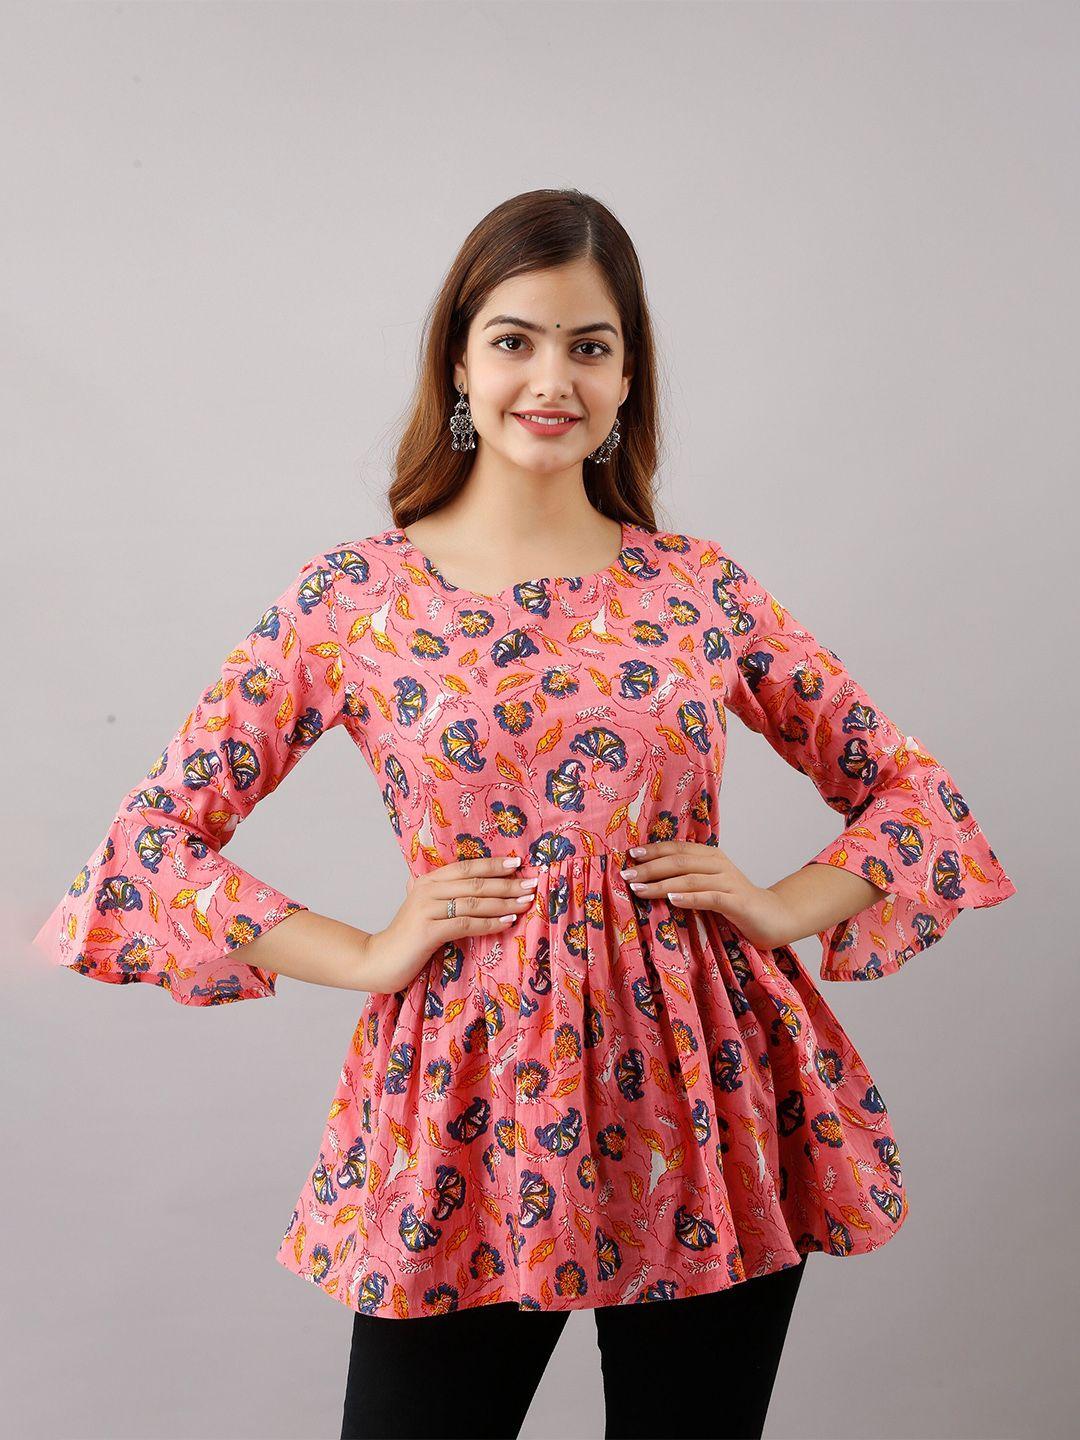 women touch pink floral print top